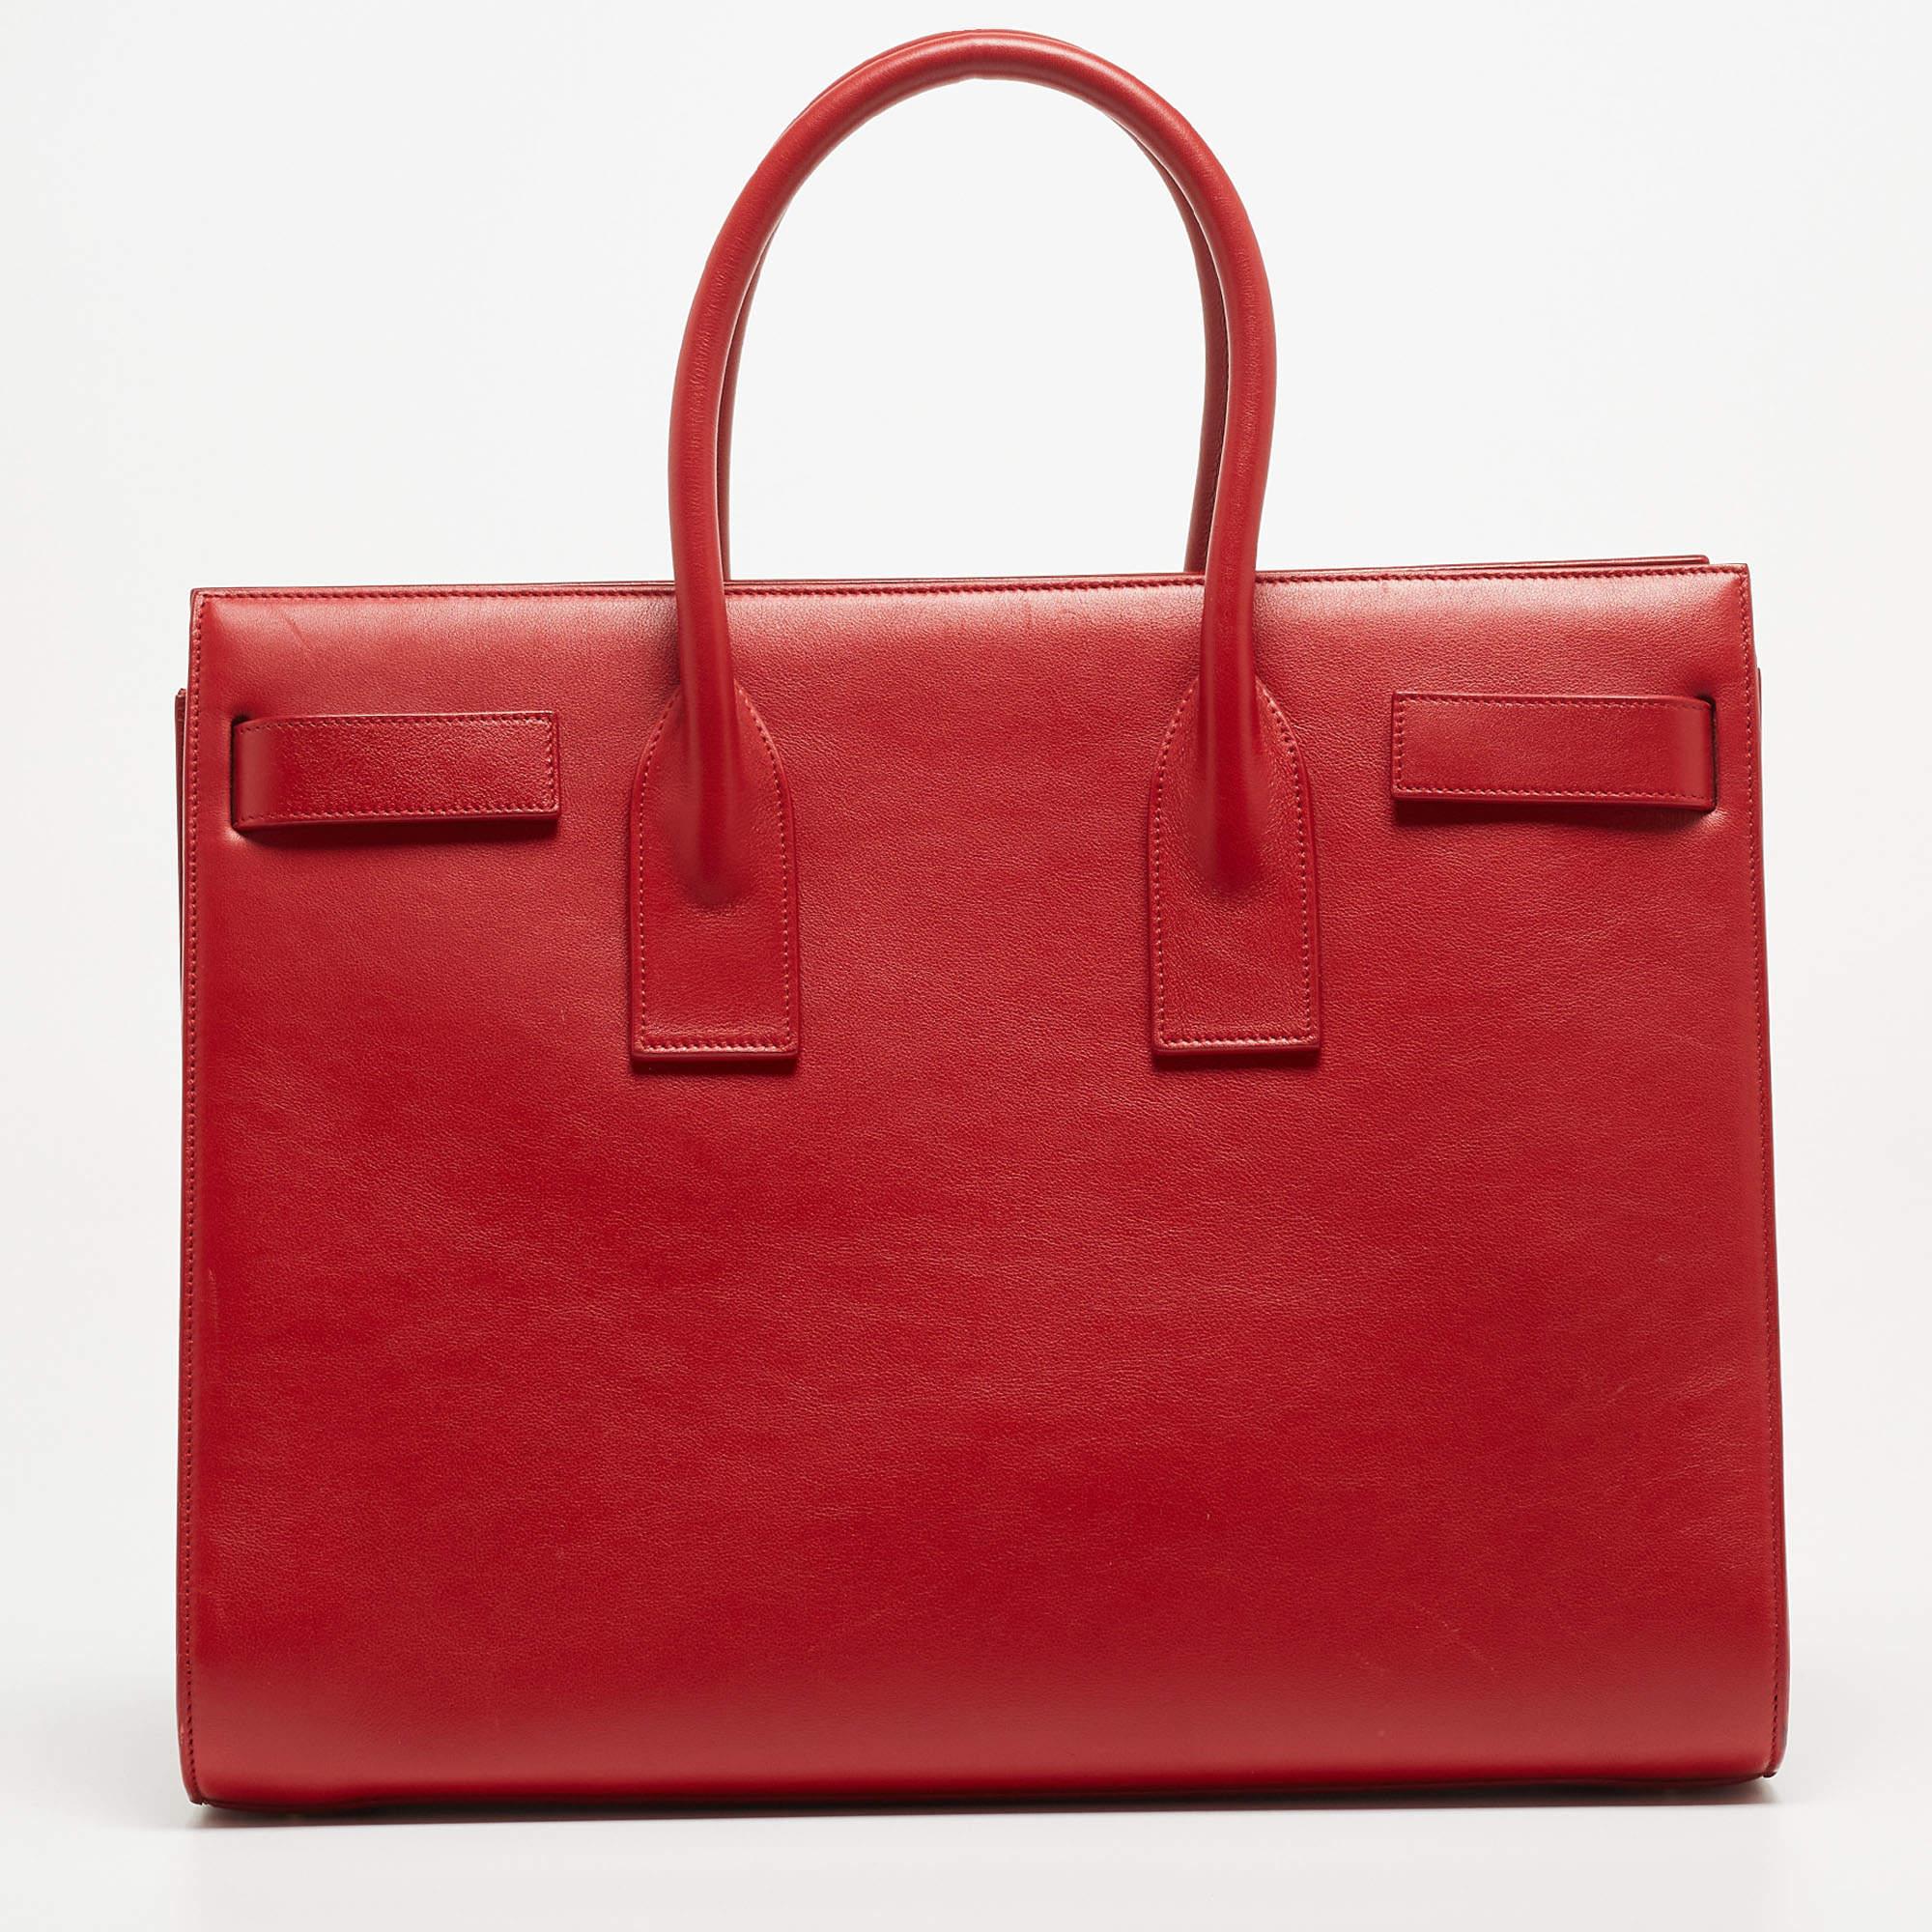 Handbags are more than just instruments to carry one's essentials. They essay one's sense of style, and the better the bag, the more confidence we get when we hold it. This Saint Laurent red bag is meticulously made from luxe materials and has a